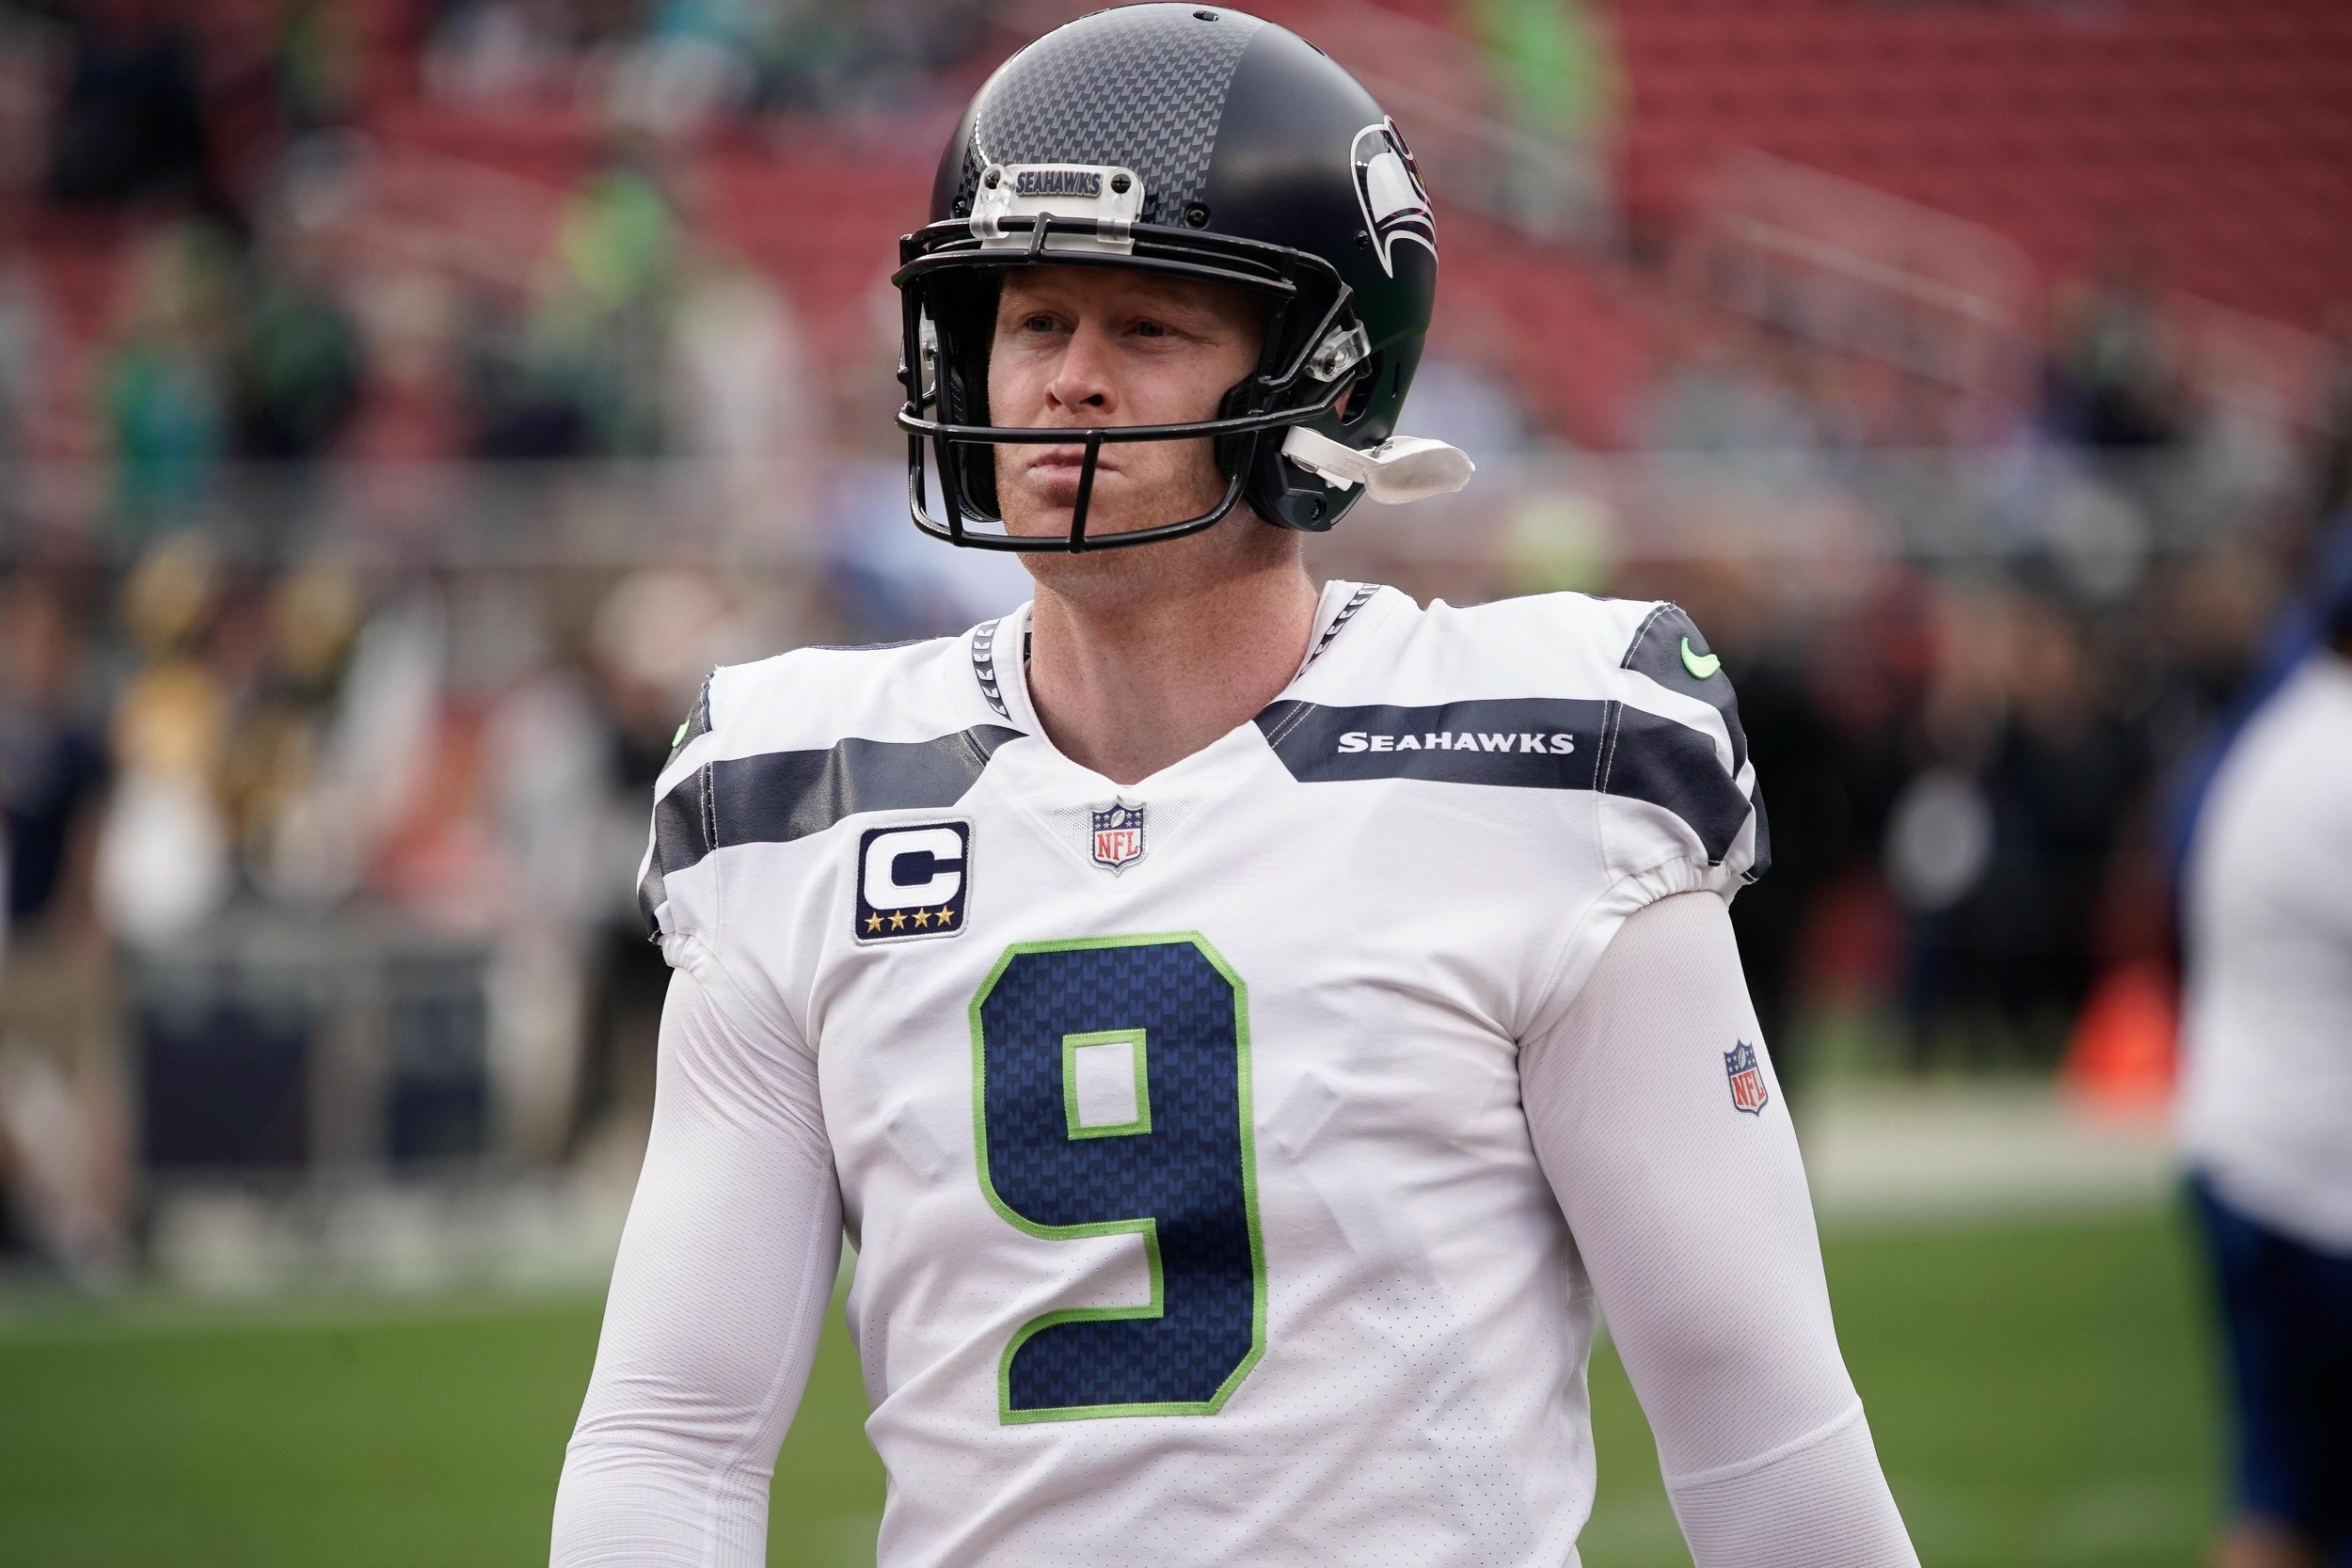 seahawks sign p jon ryan to one-day contract to retire with team